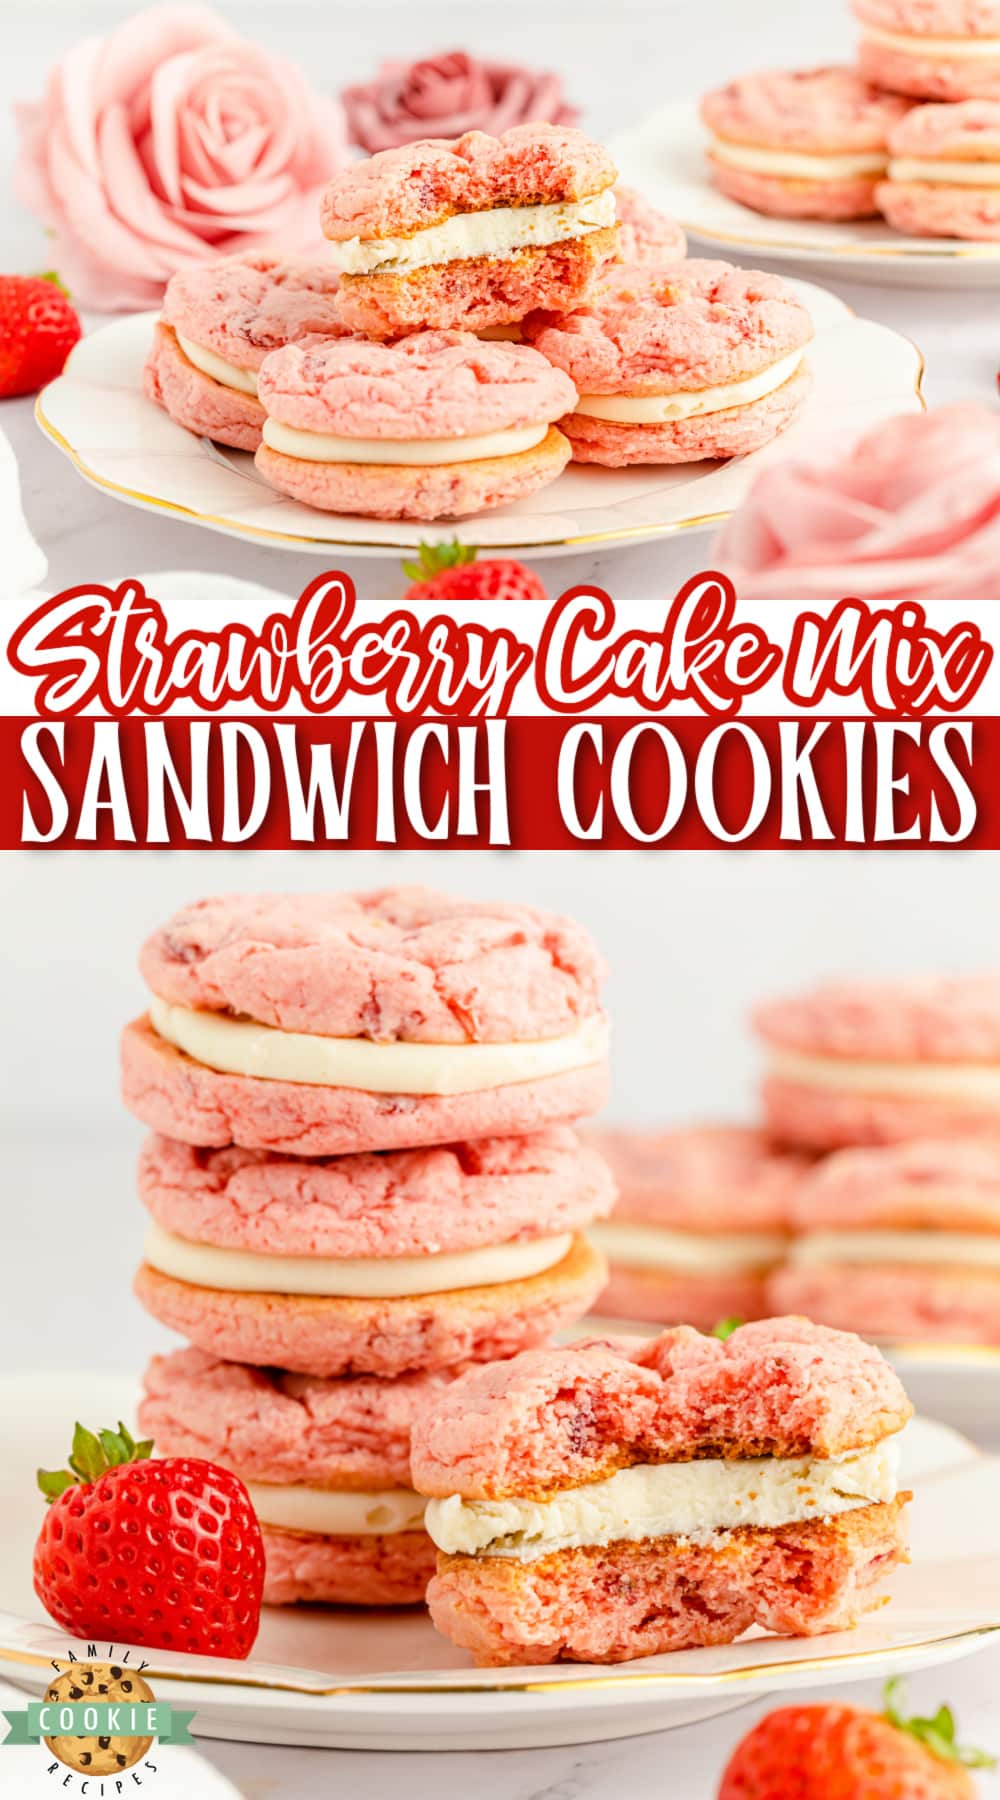 Strawberry Cake Mix Sandwich Cookies are made with freeze dried strawberries and a simple cream cheese filling. Easy cookie sandwiches that are packed with strawberry flavor! via @buttergirls